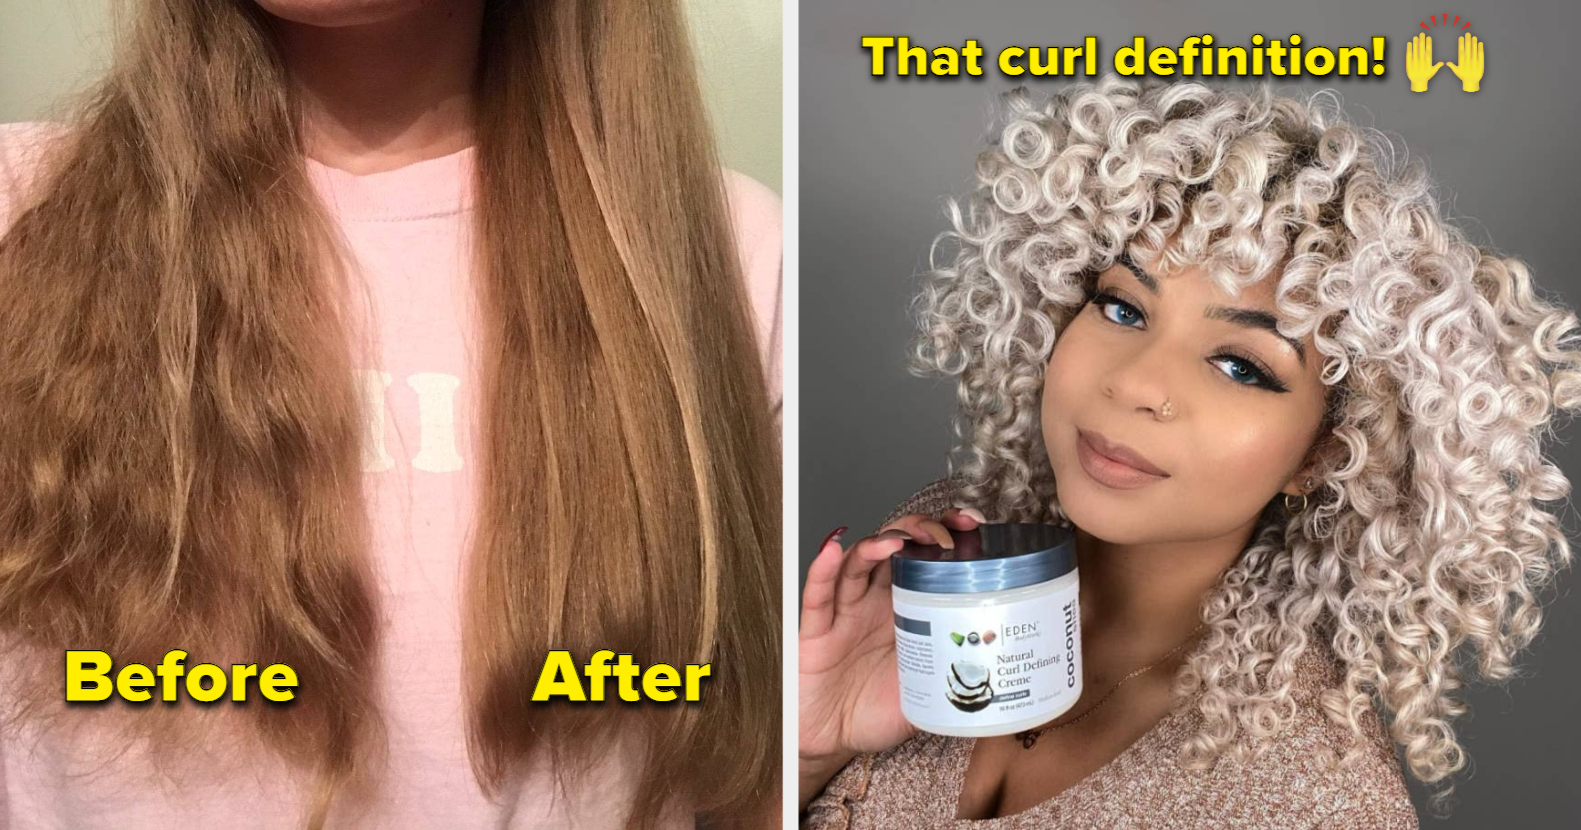 26 Things To Help You Have A Good Hair Day